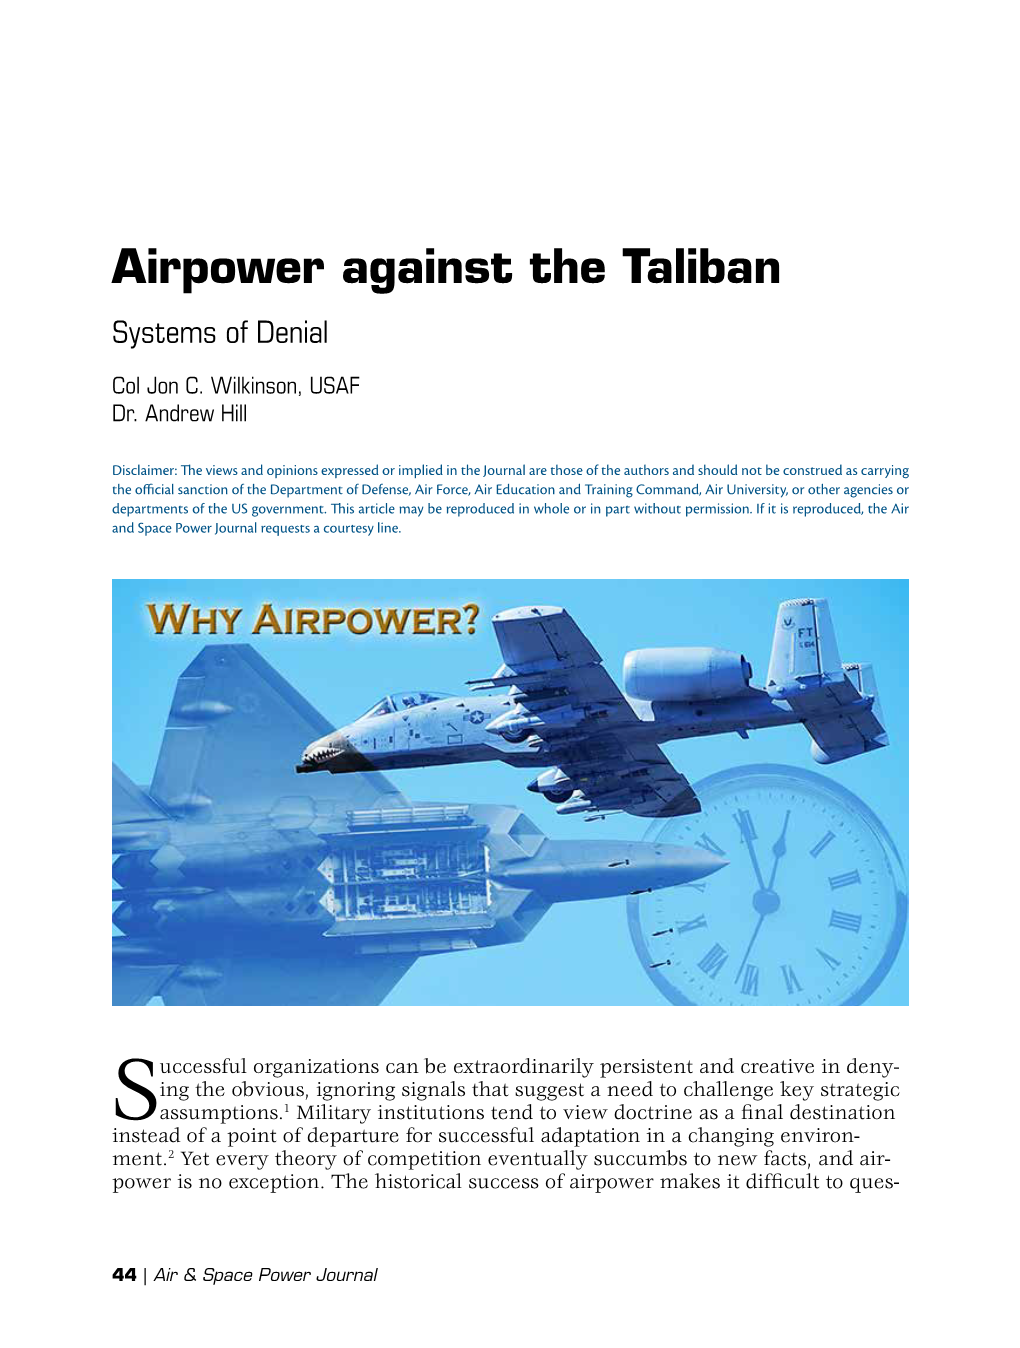 Airpower Against the Taliban: Systems of Denial